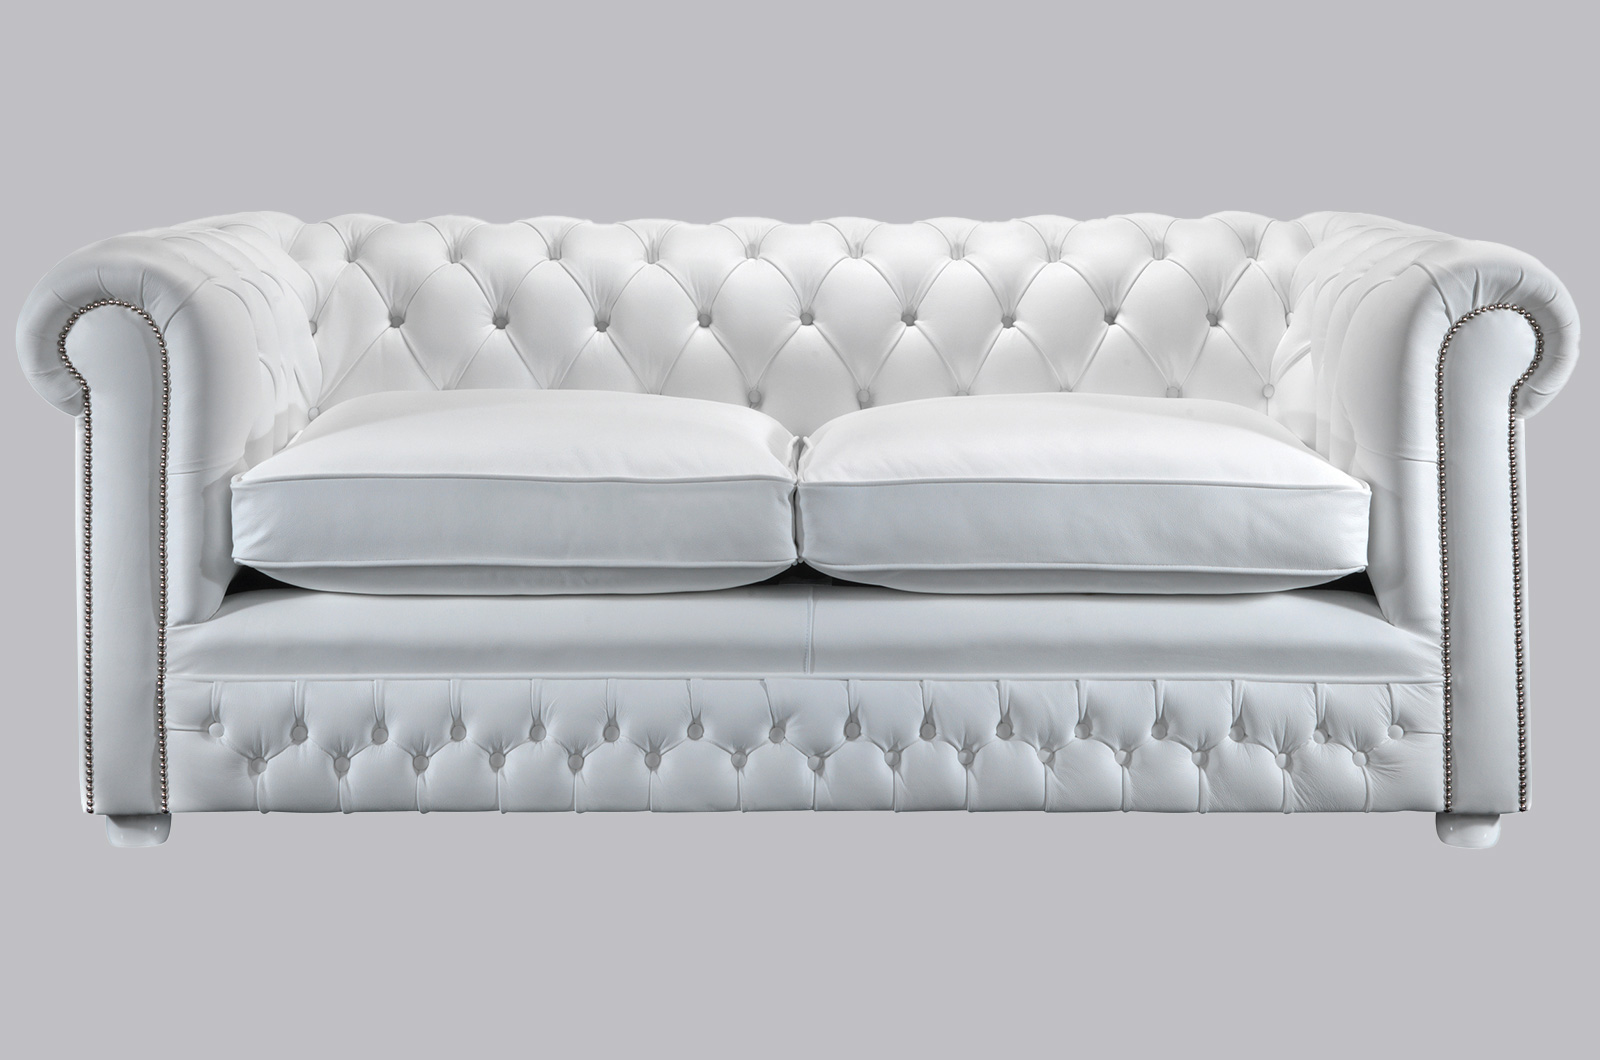 Sink Into Luxury: Your Statement Sofa Awaits!